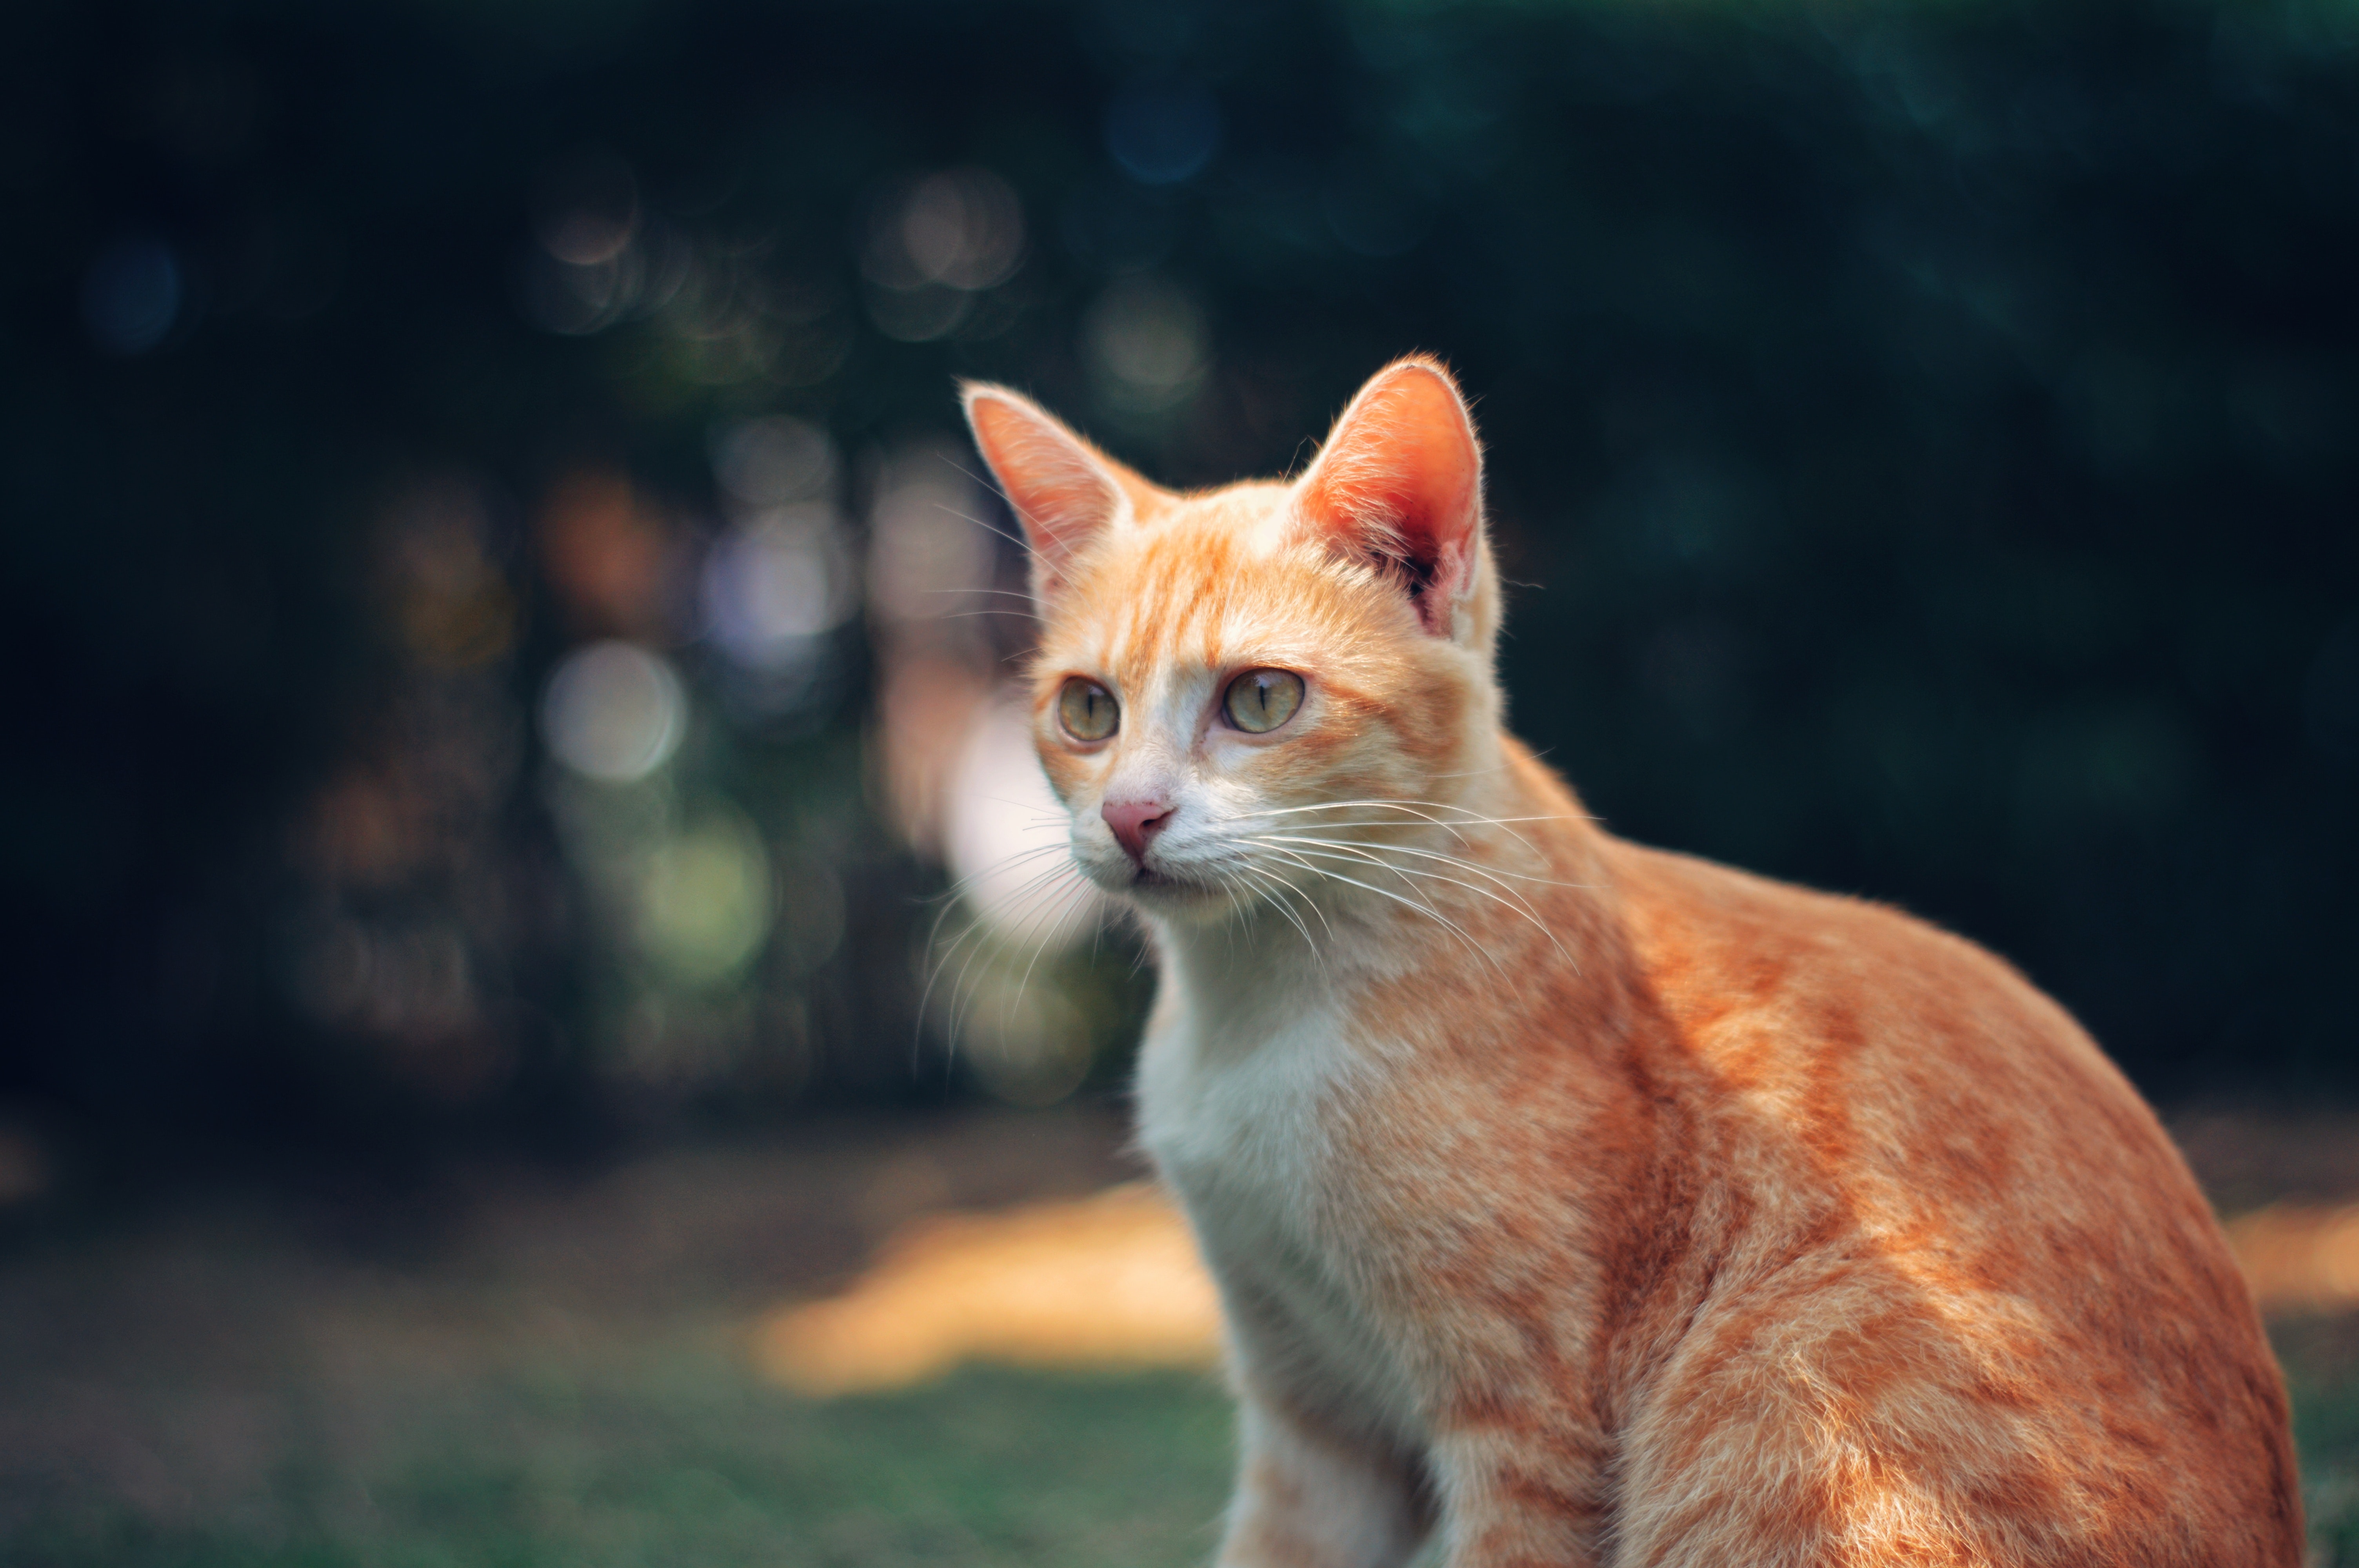 Selective focus photography of a red tabby cat